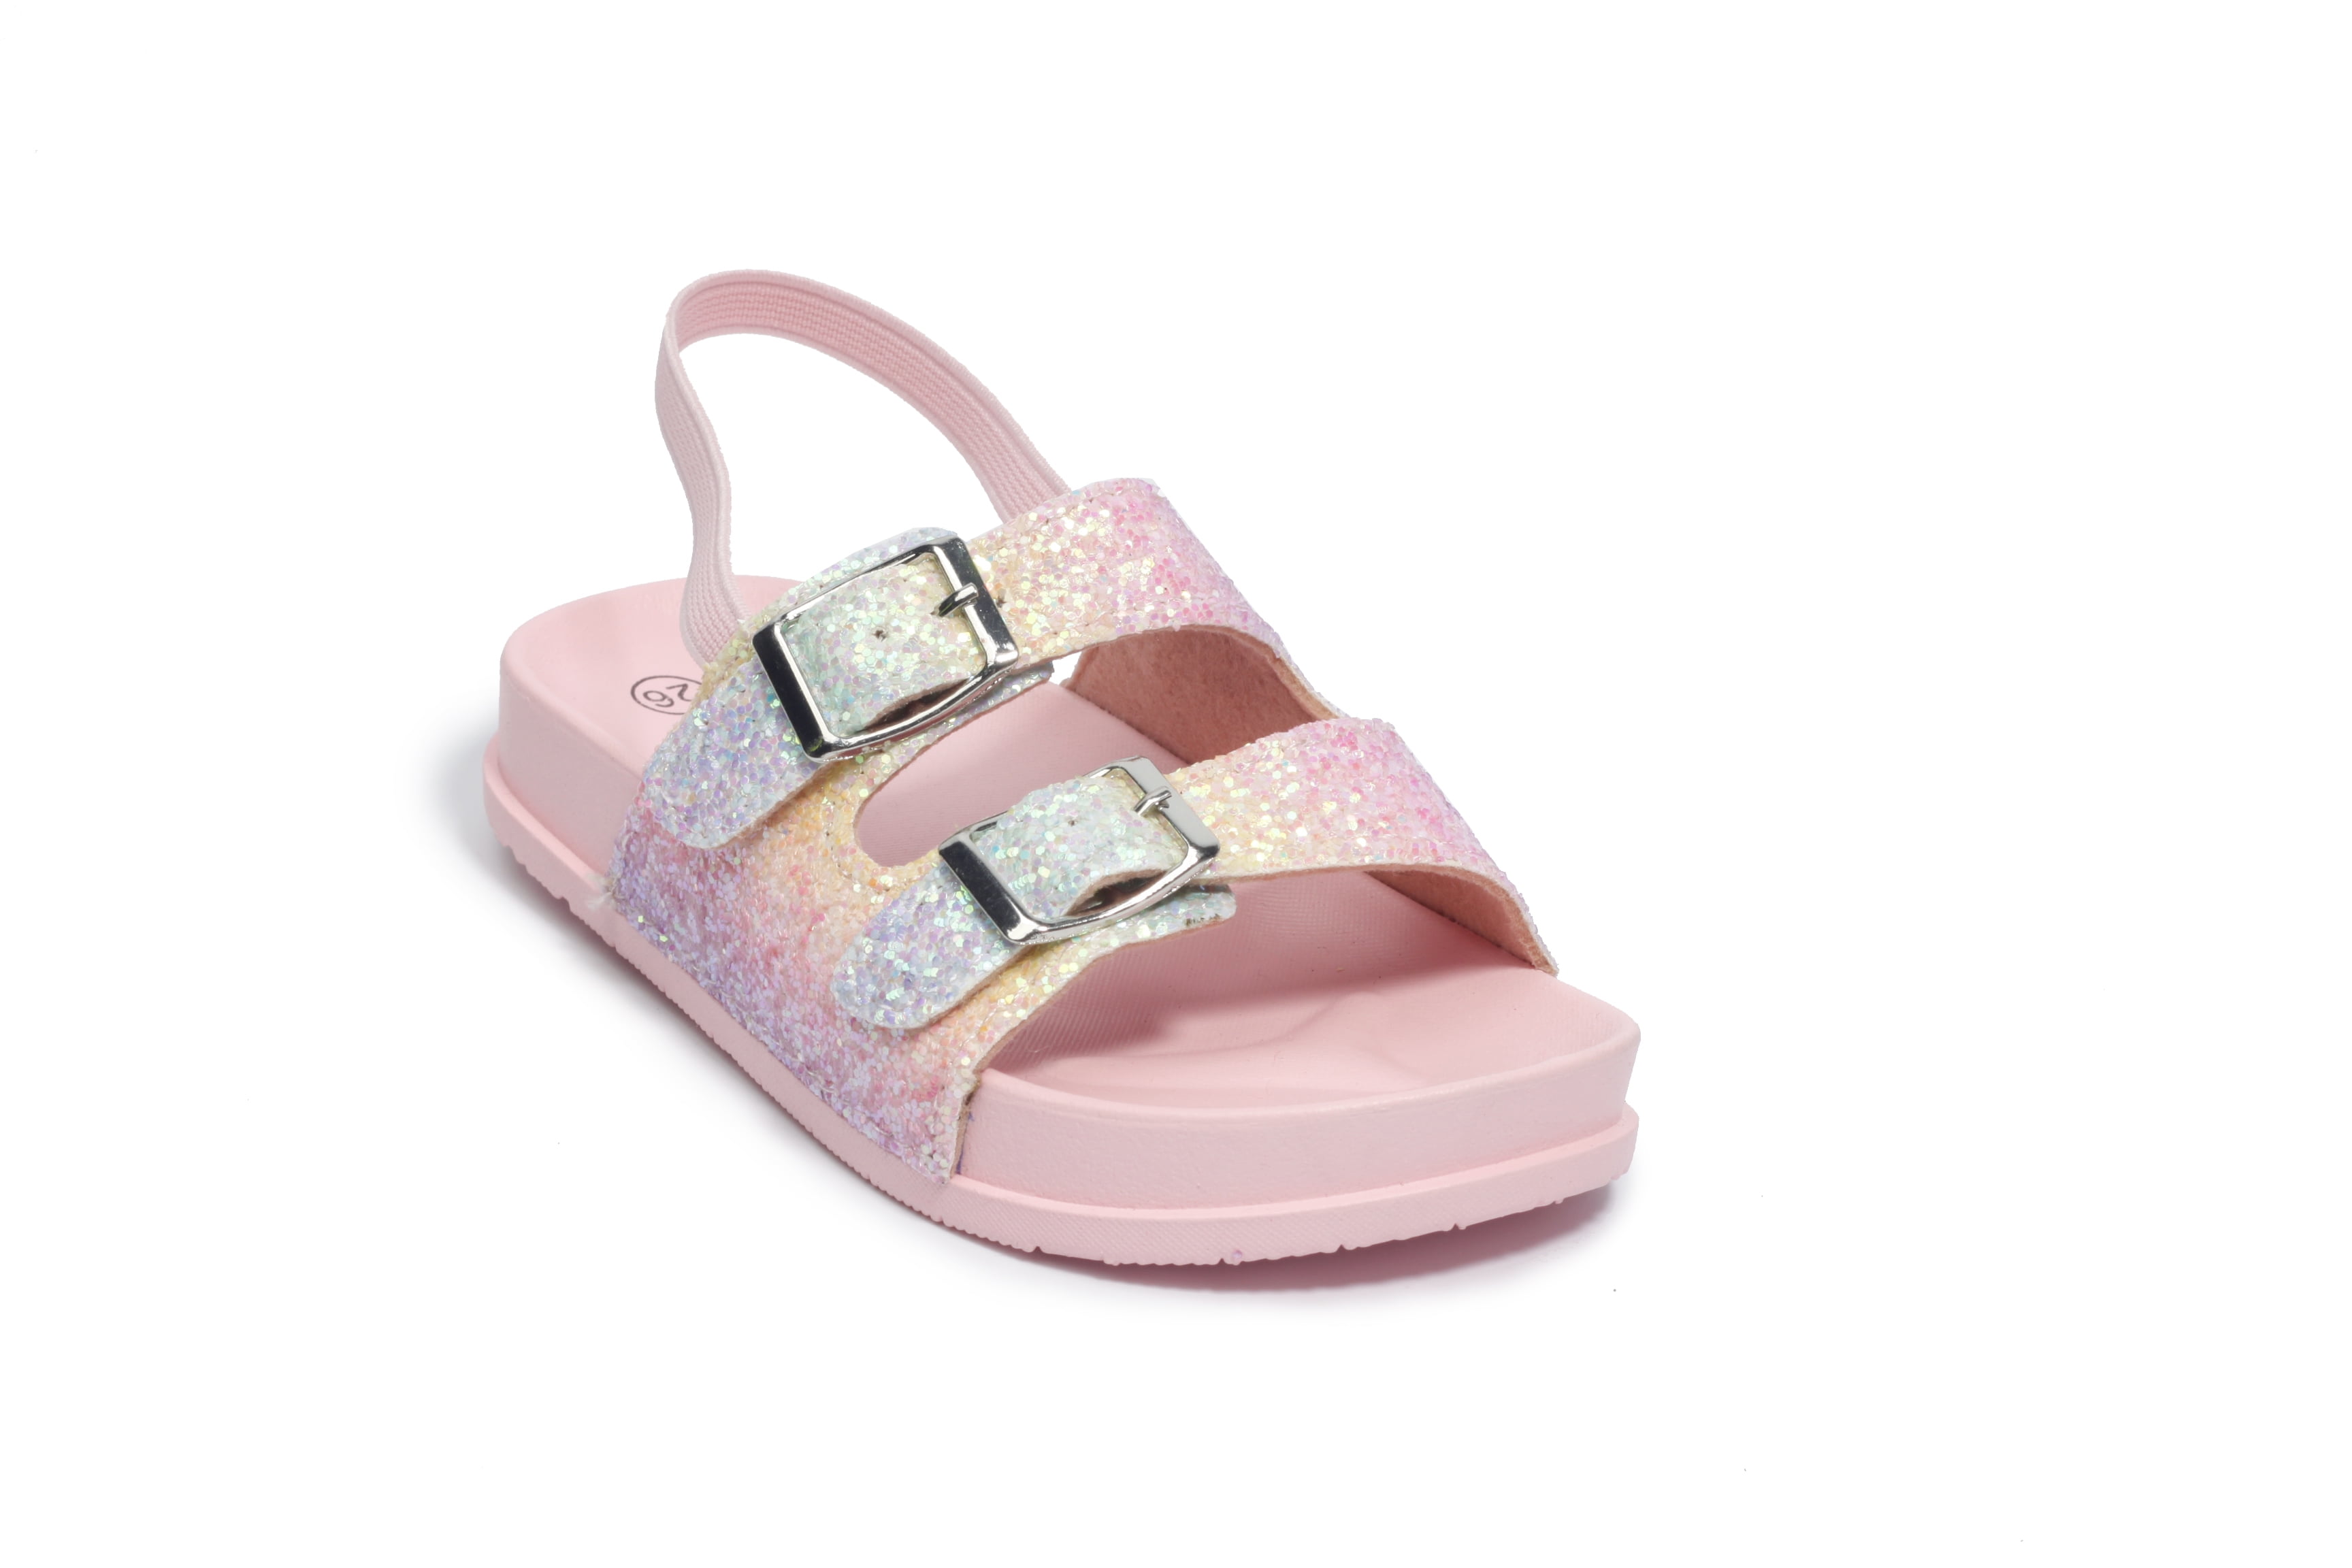 New girl's kids sandals pink sequins buckle closure casual open toe summer 